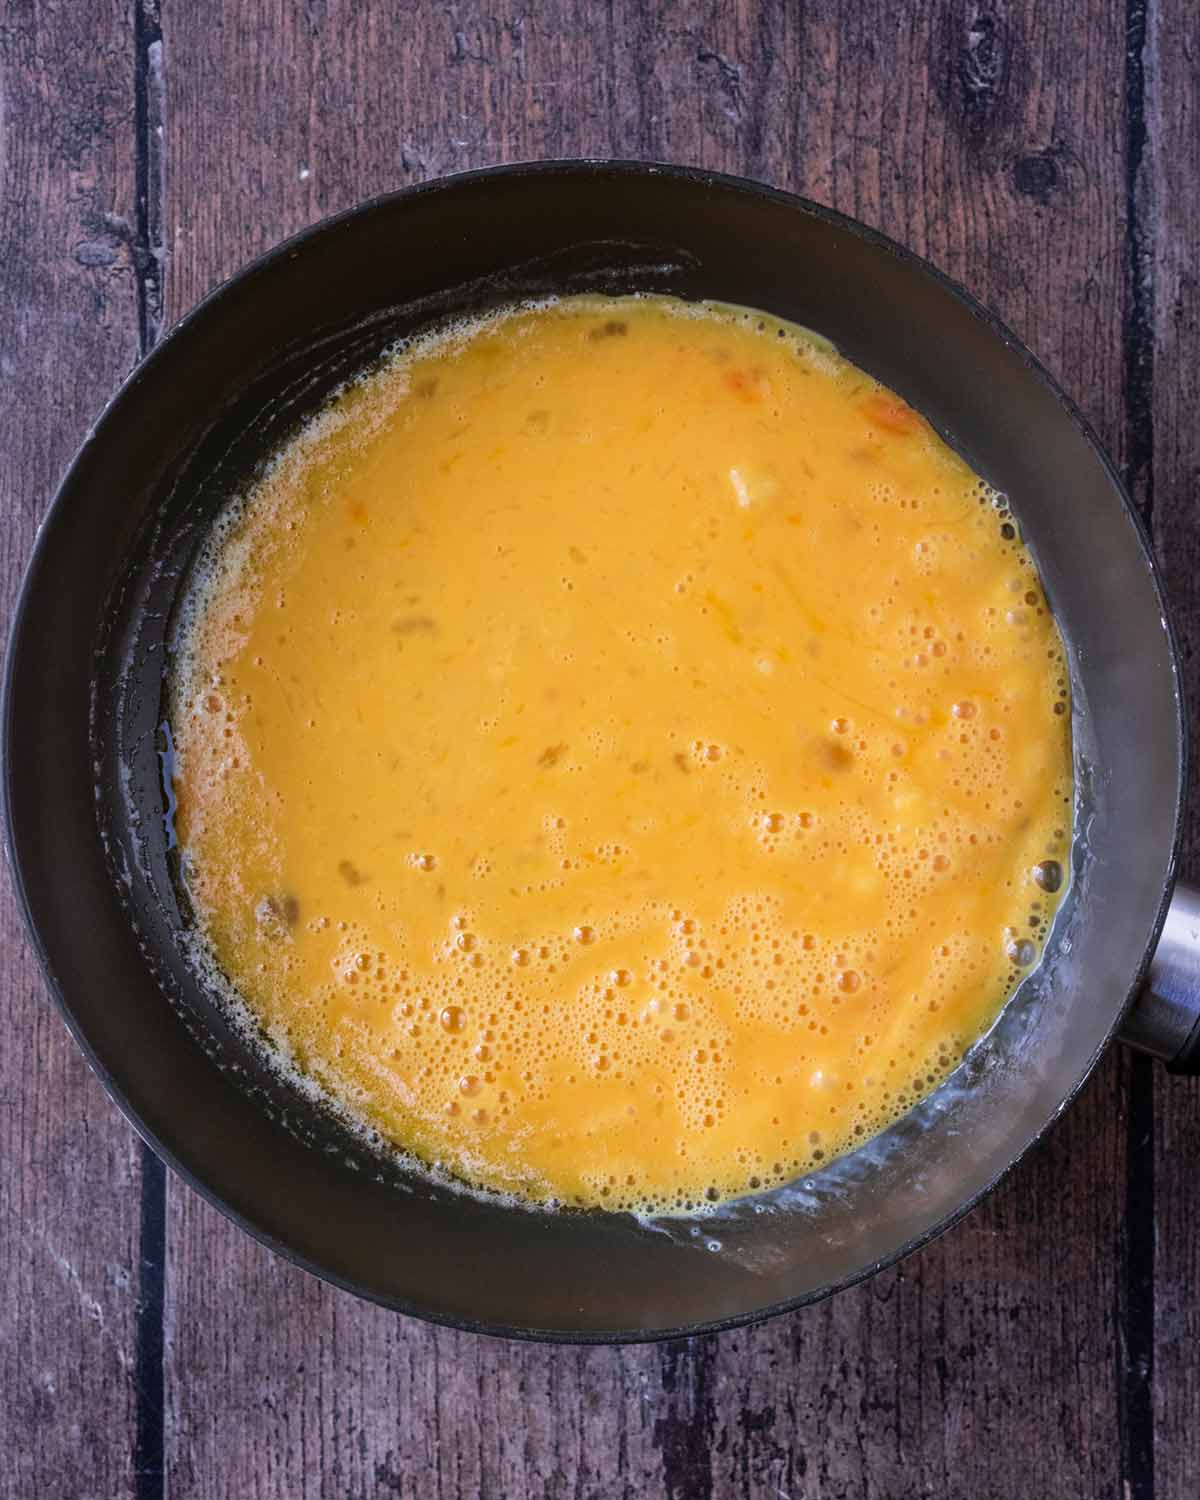 Whisked eggs in the frying pan.